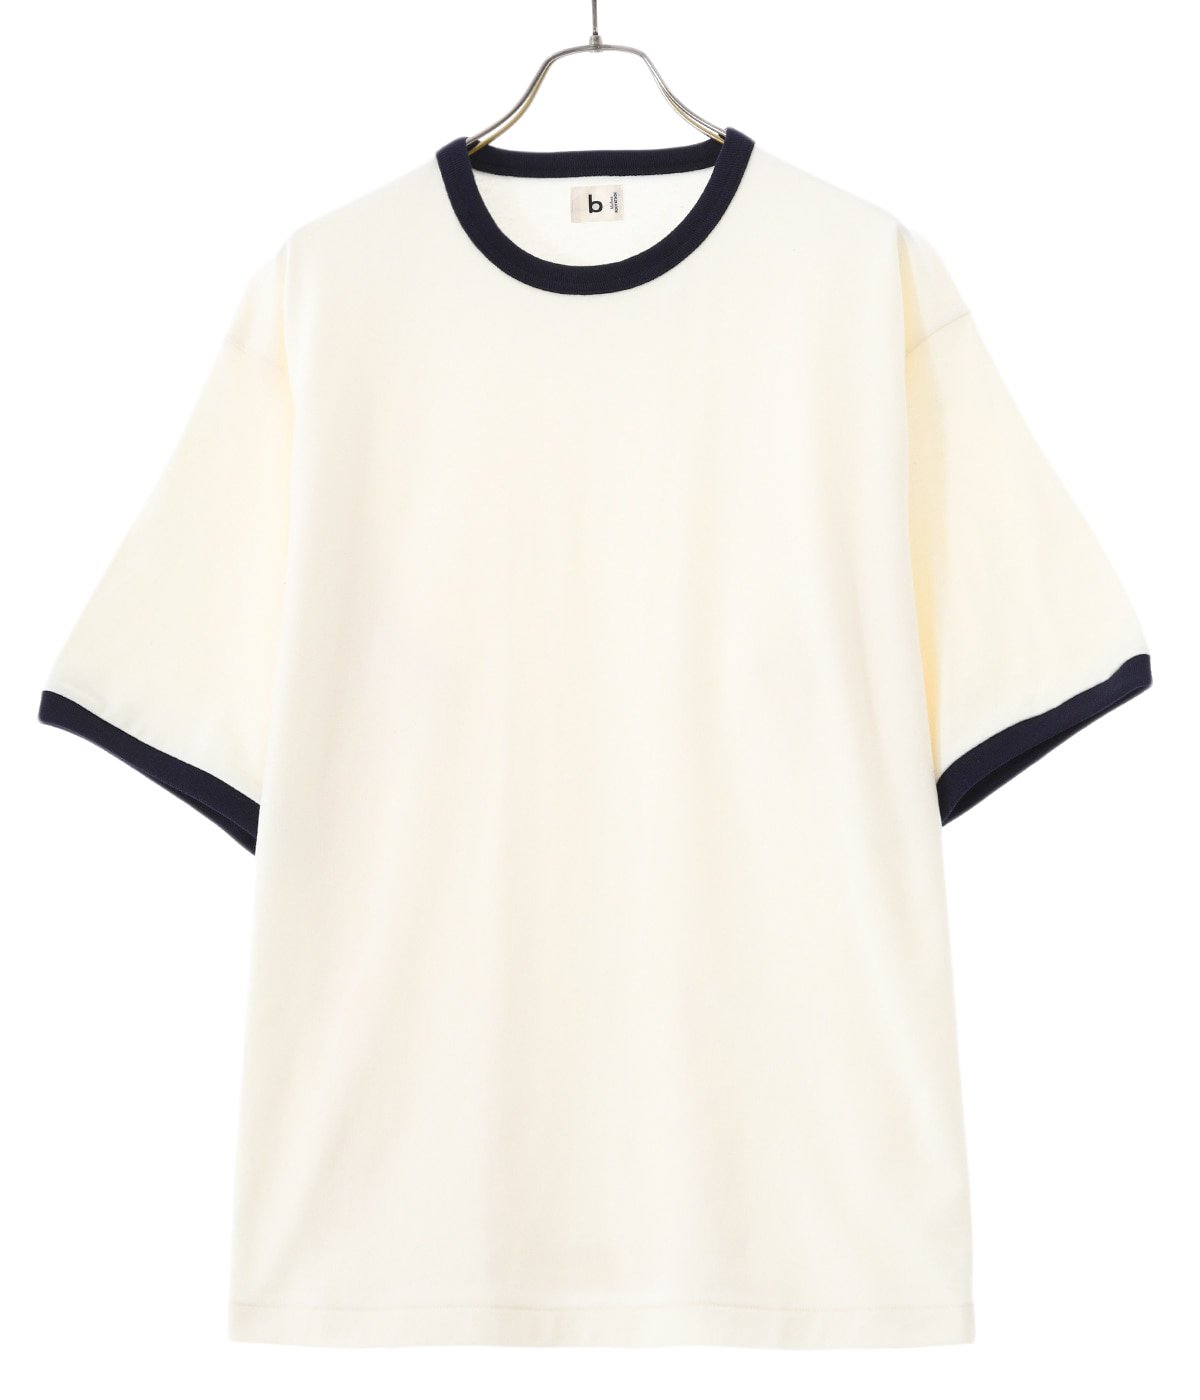 【ONLY ARK】別注 Cotton Rayon 88/12 Trim Tee ARK